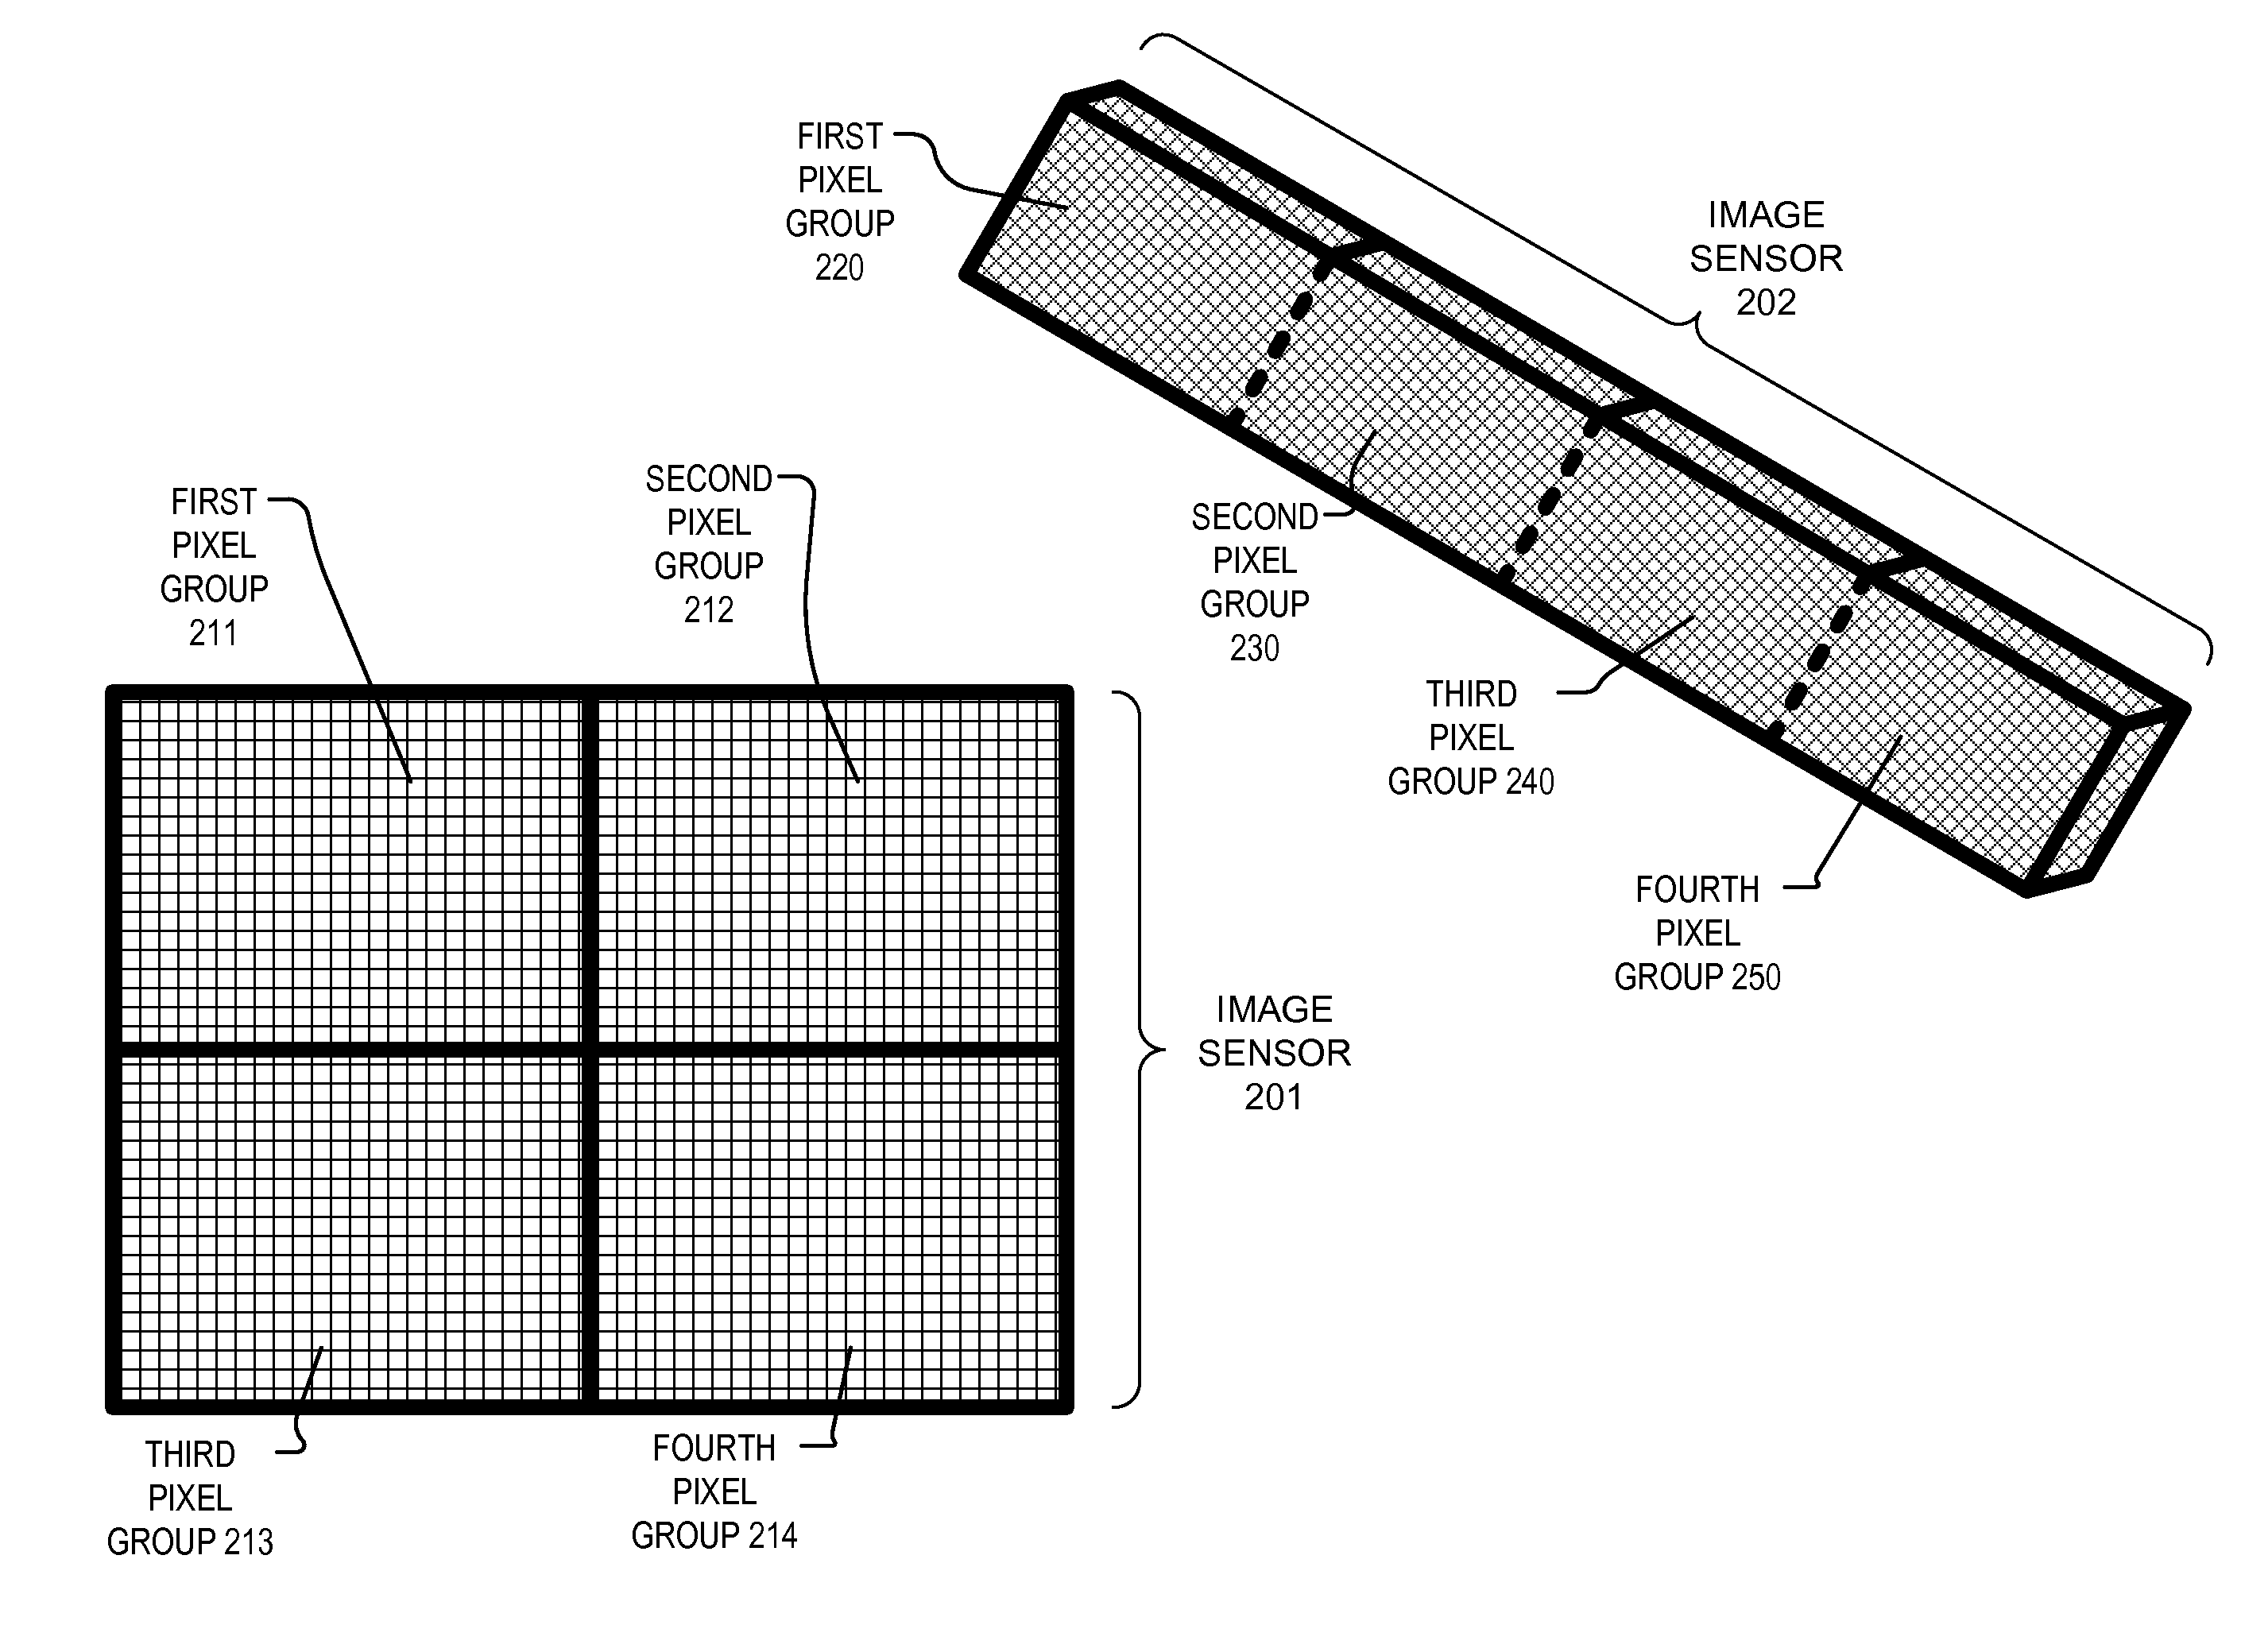 Imaging device with a plurality of pixel arrays